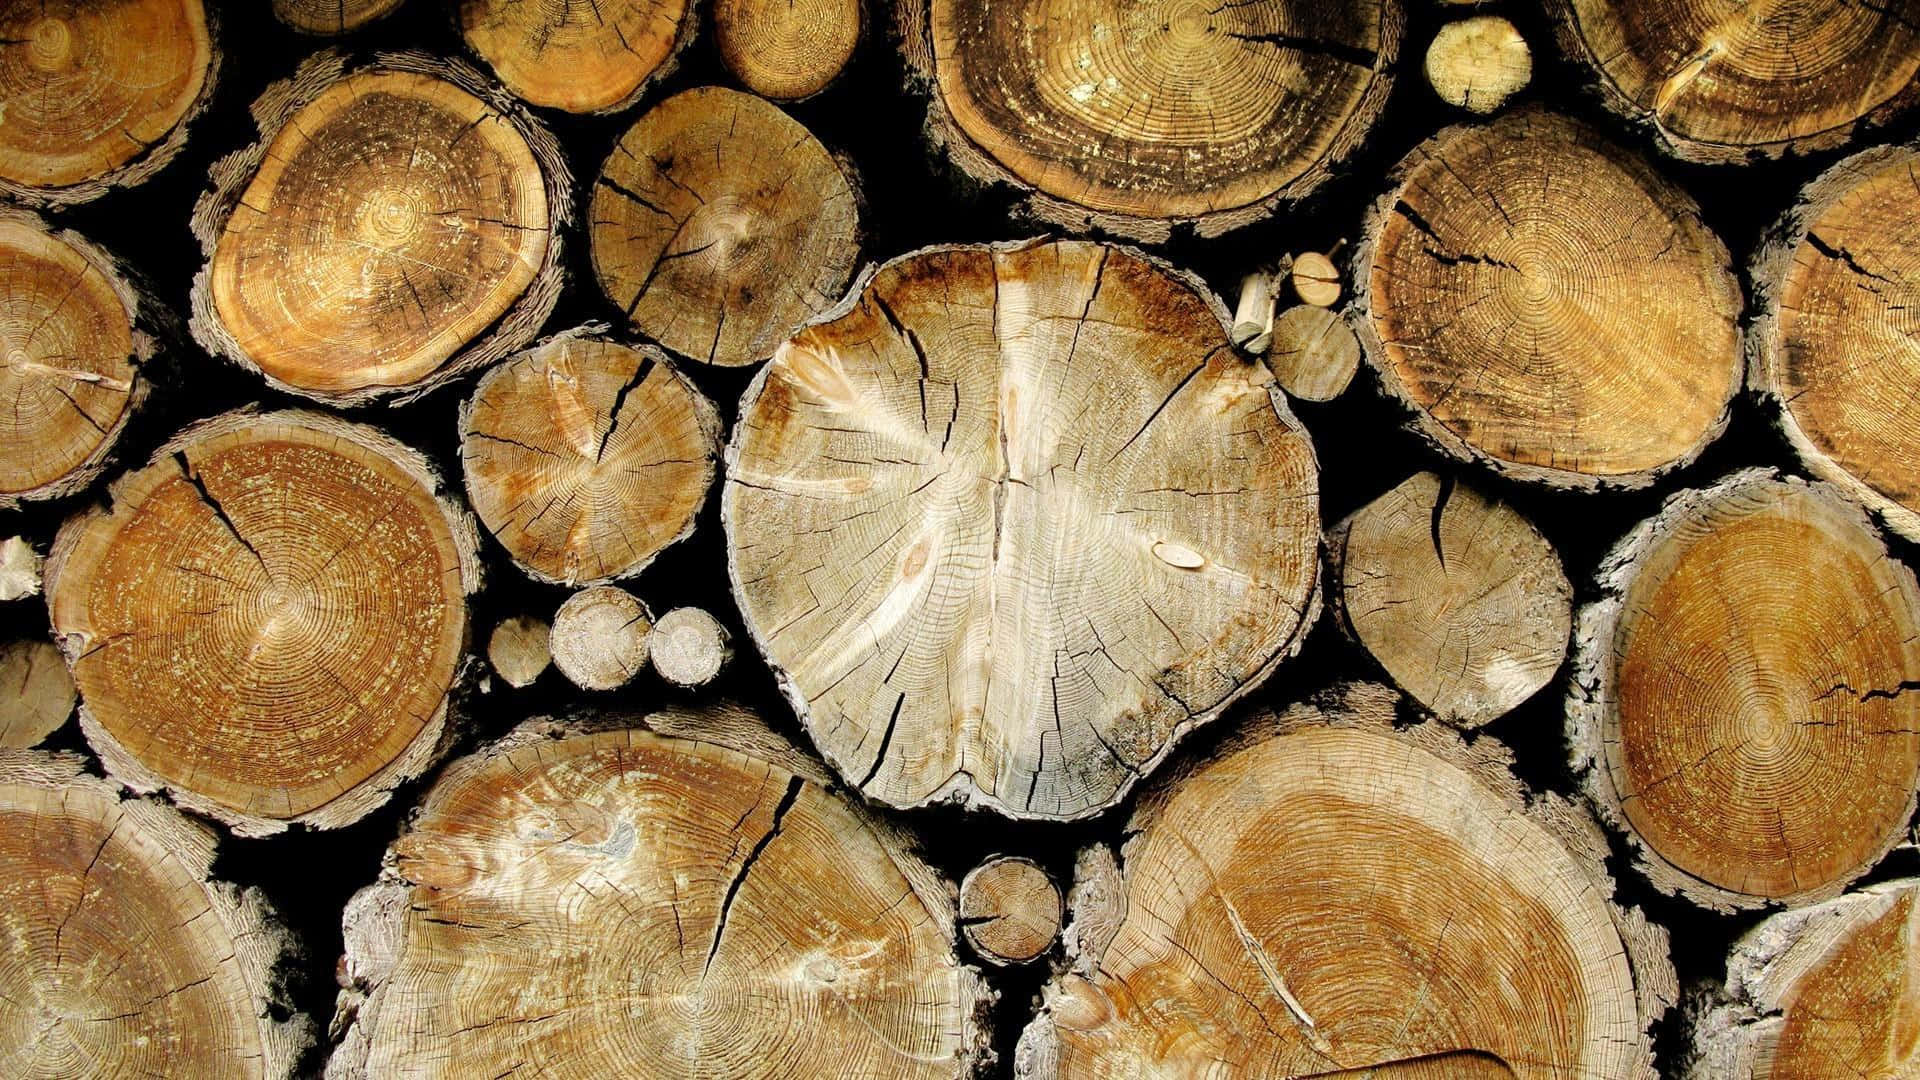 "Detailed Cross-Section of Antique Timber" Wallpaper